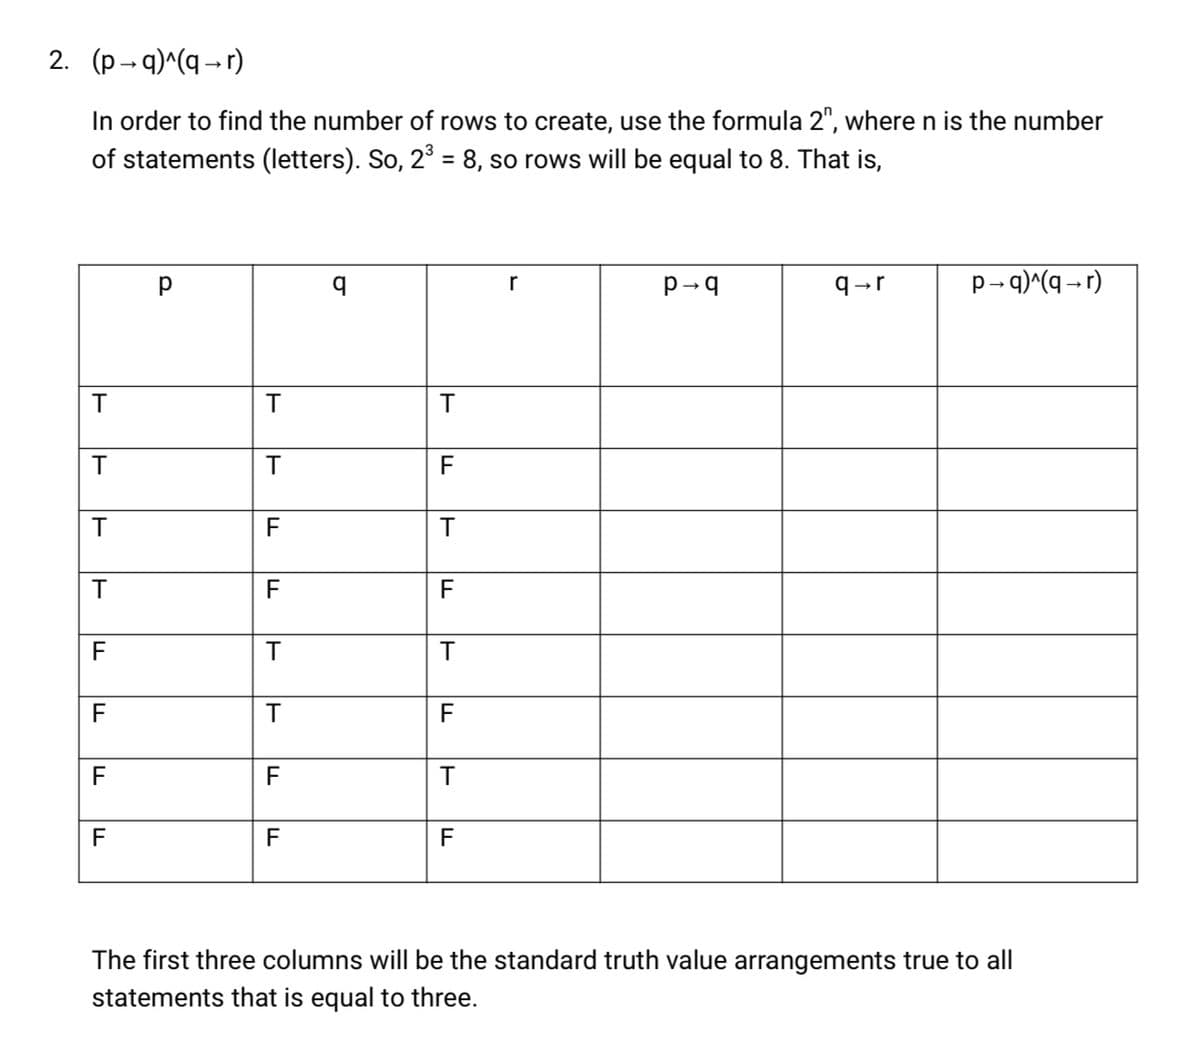 2. (p→ q)^(q → r)
In order to find the number of rows to create, use the formula 2", where n is the number
of statements (letters). So, 2 = 8, so rows will be equal to 8. That is,
r
q-r
p- q)^(q - r)
F
F
F
F
F
T
F
F
F
F
F
The first three columns will be the standard truth value arrangements true to all
statements that is equal to three.
